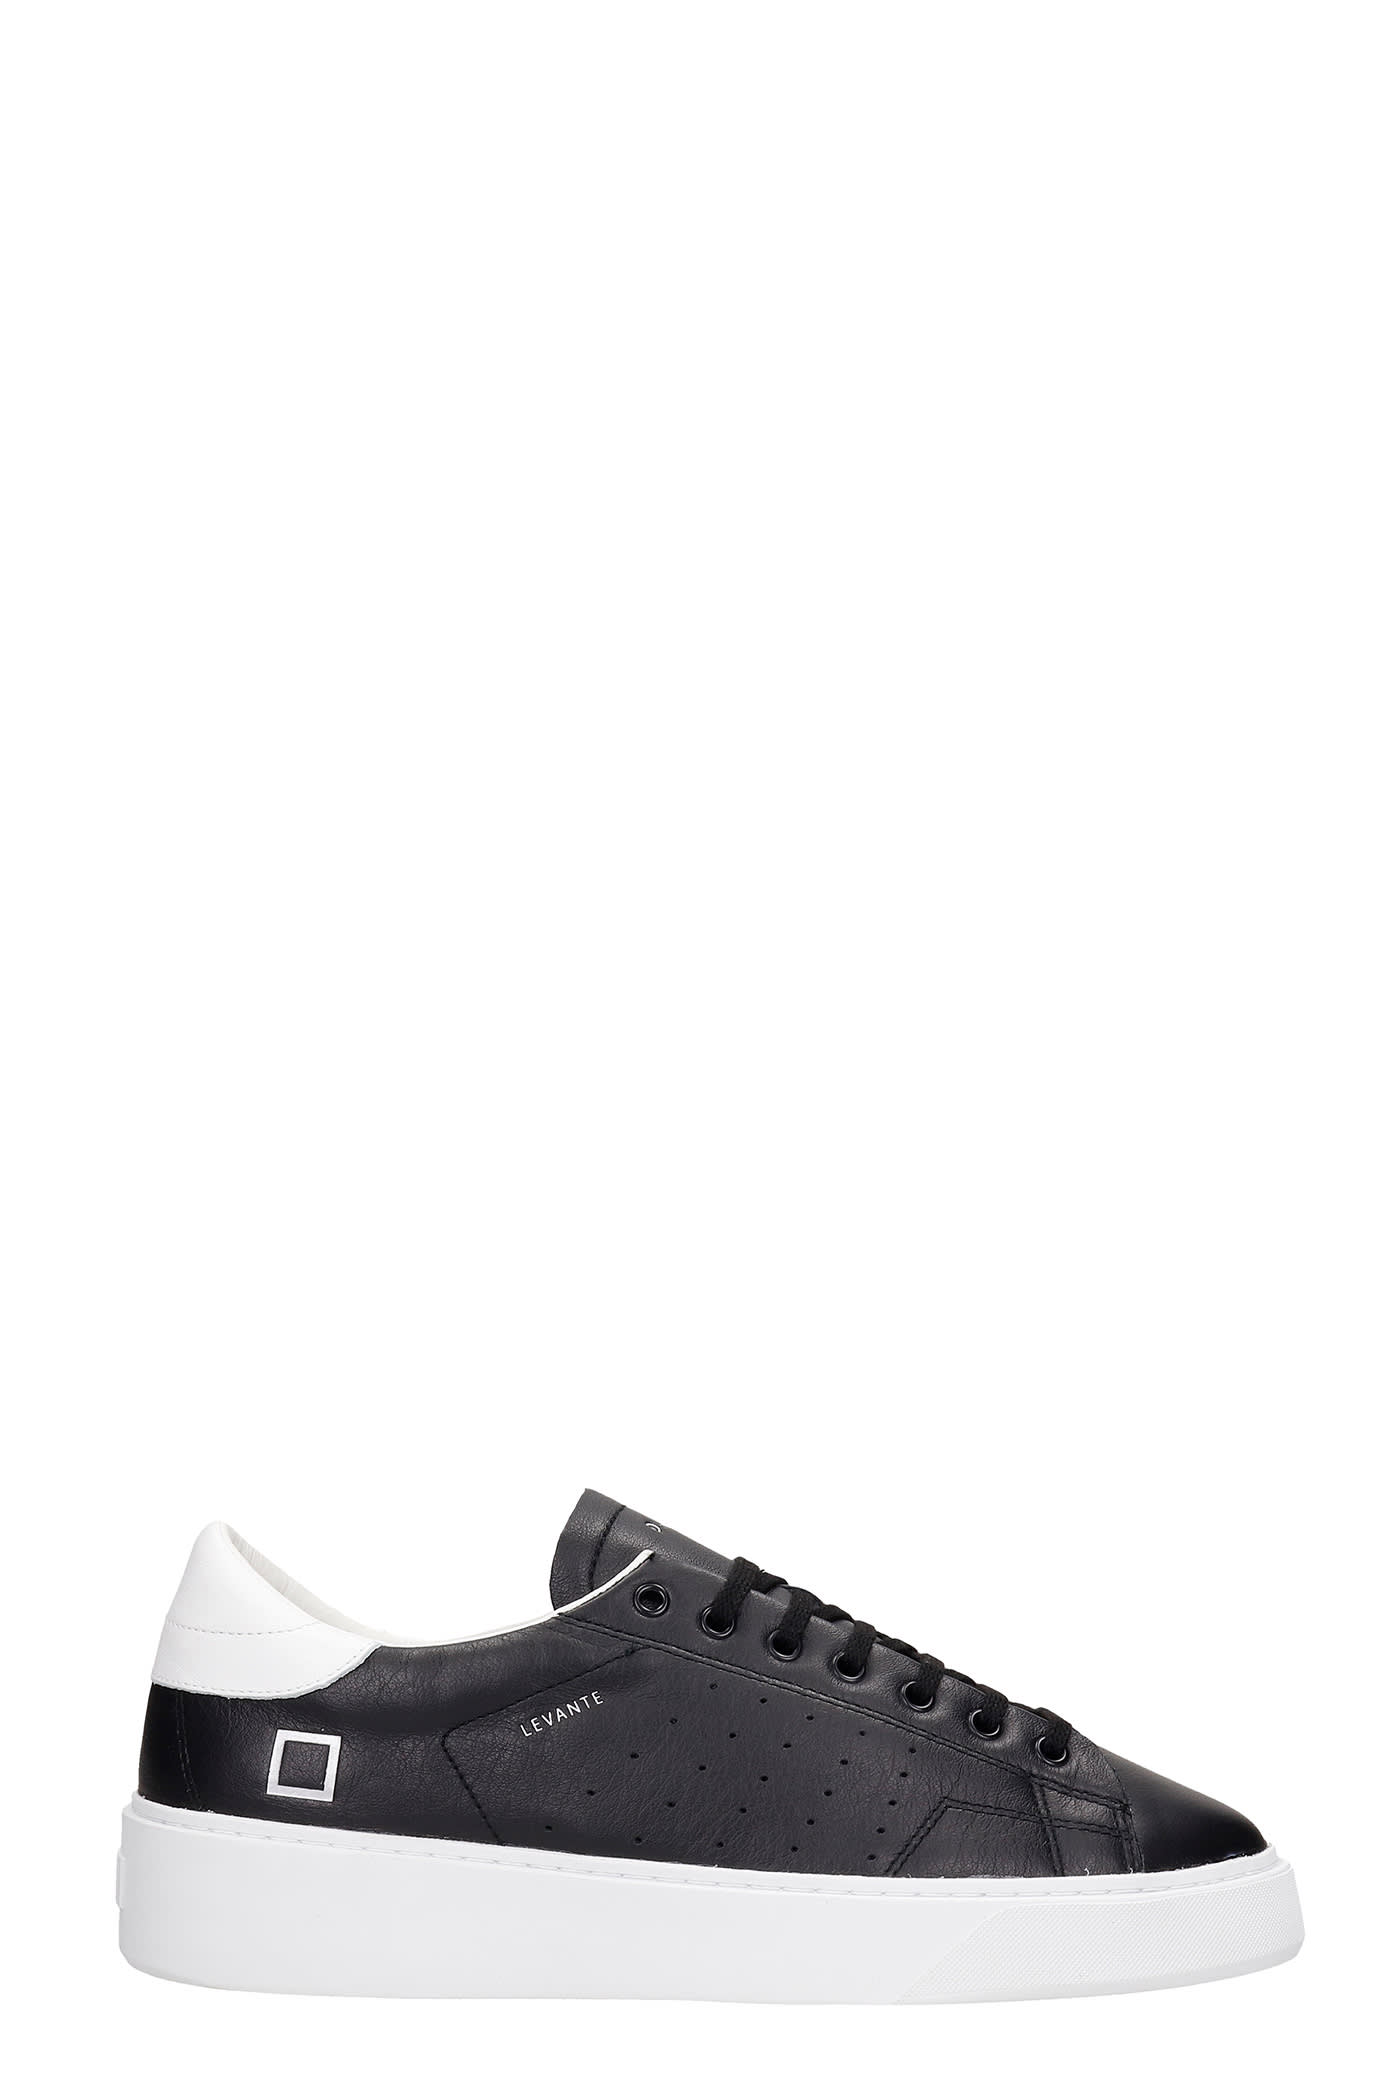 D.A.T.E. Levante Sneakers In Black Leather